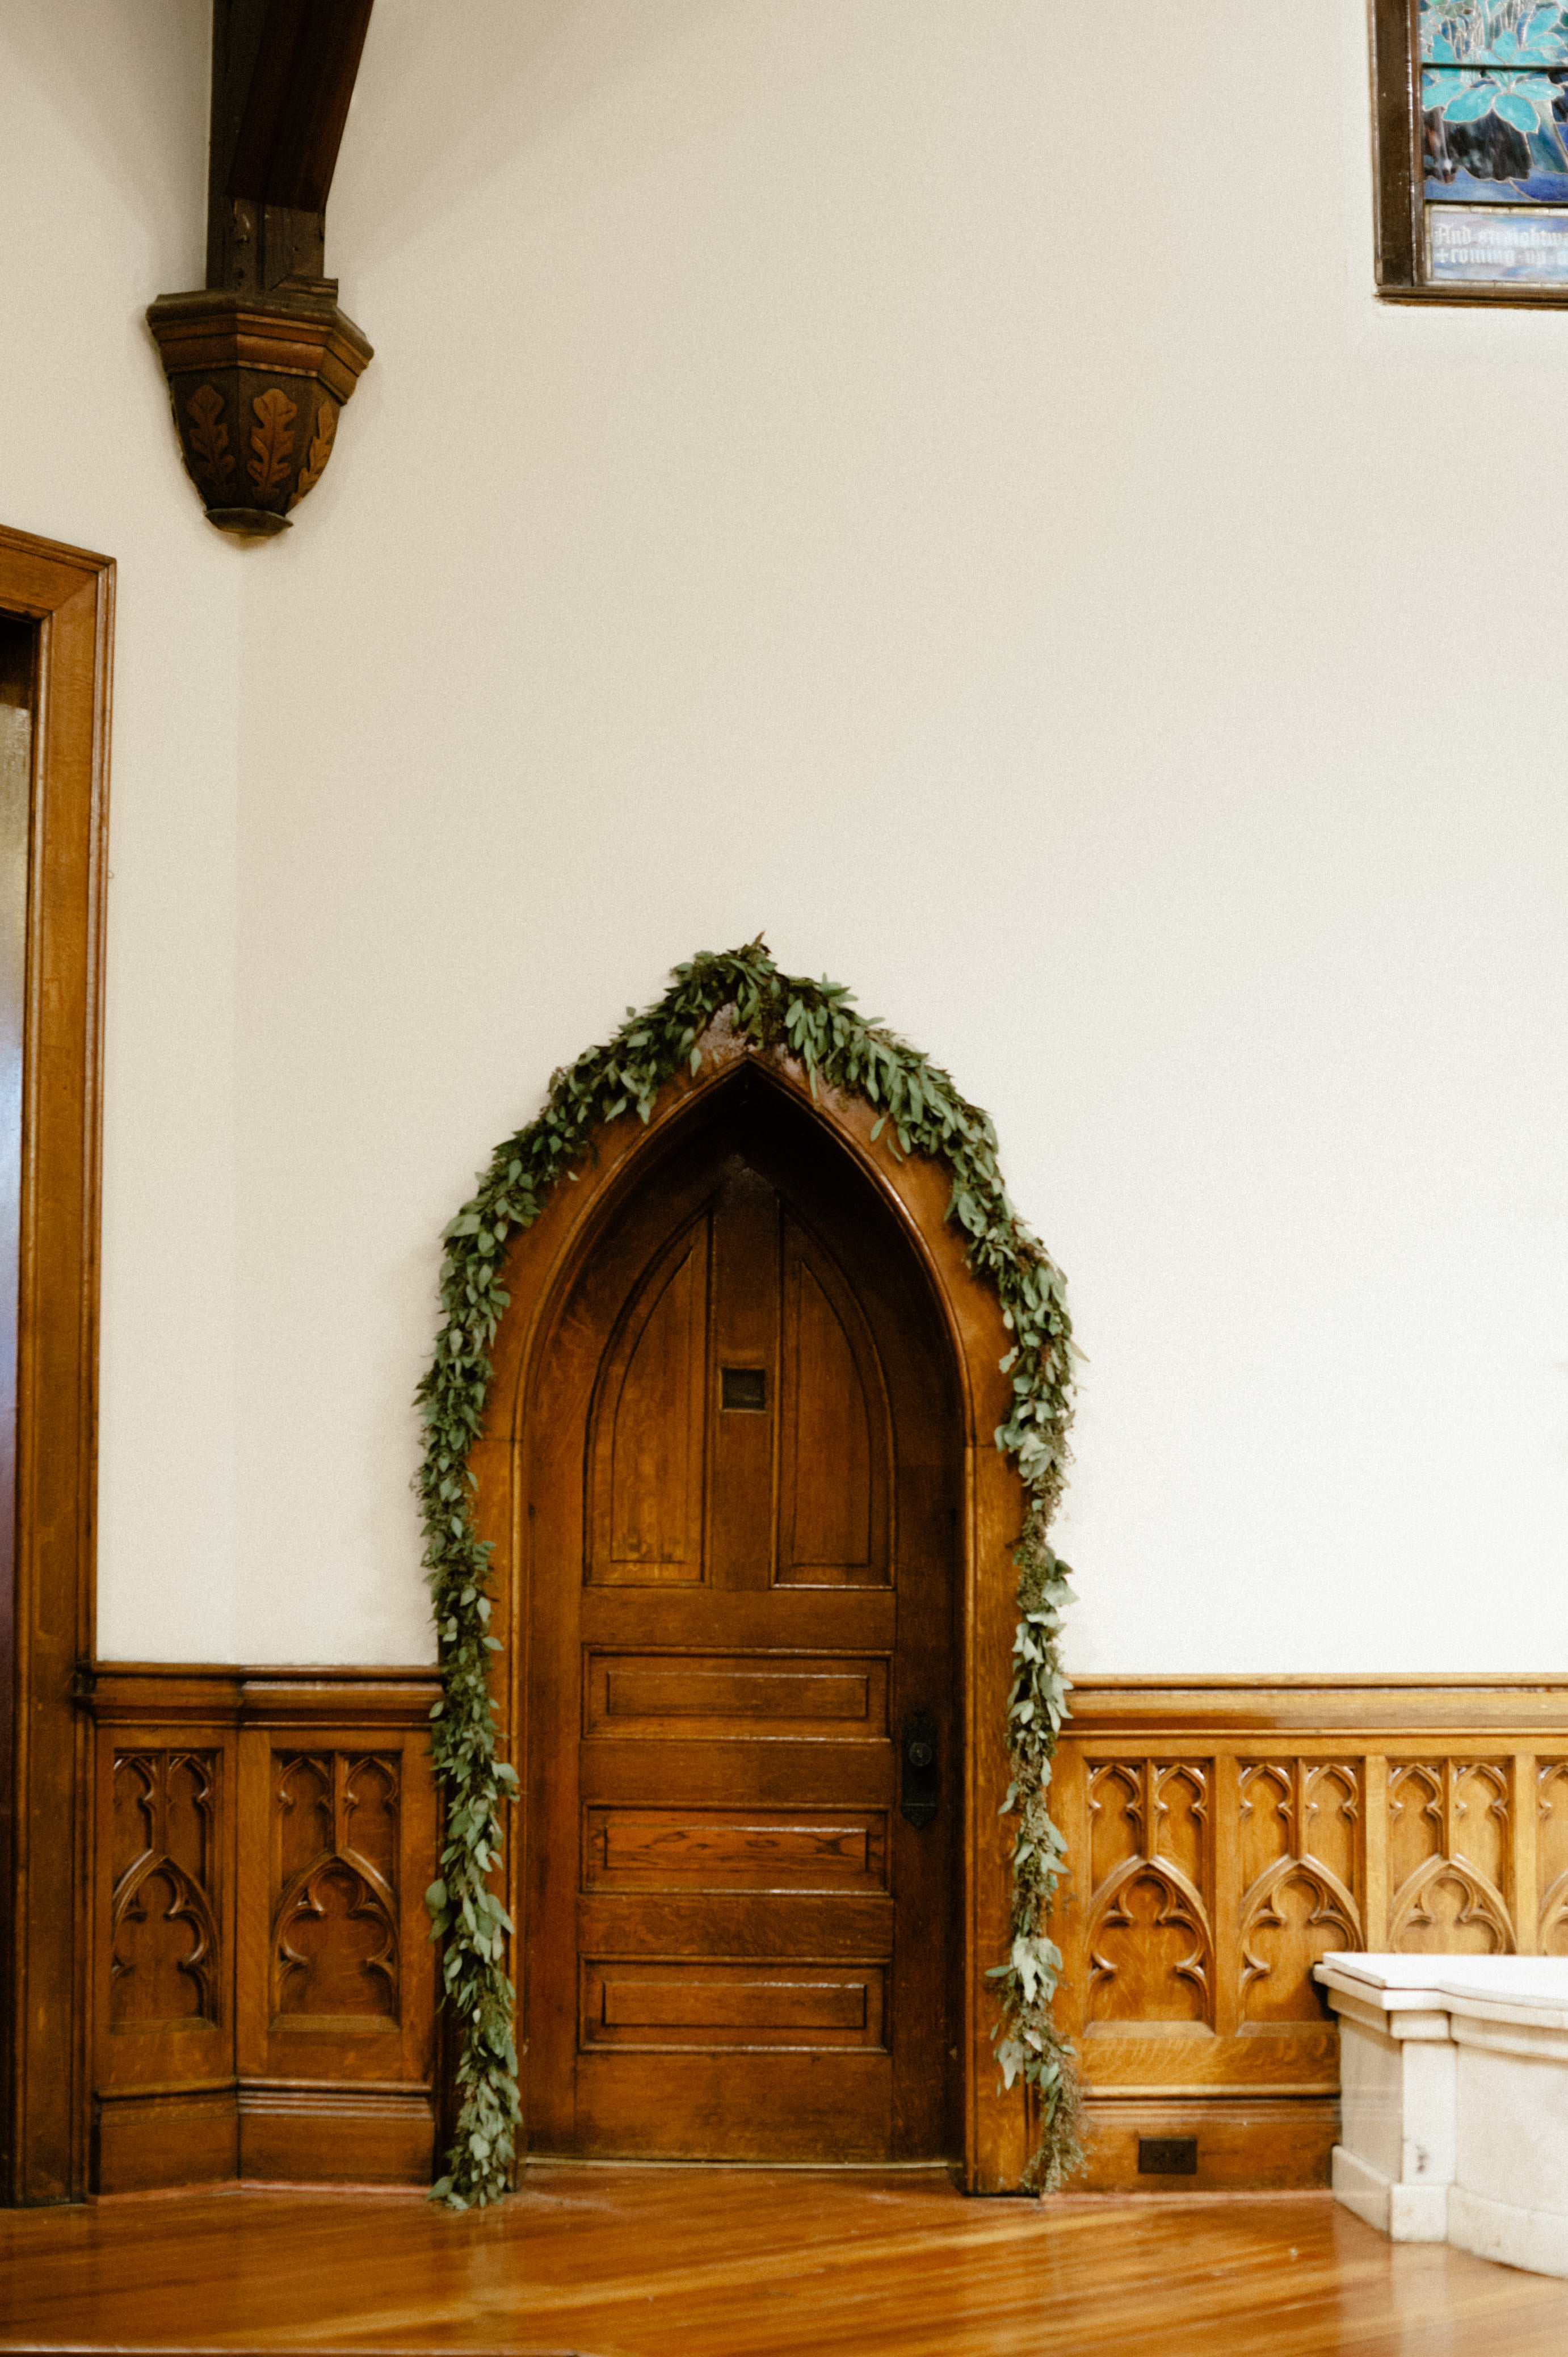 a stunning photo capture of architecture in First Baptist Church historical doorway greenery arrangement for a wedding in Selma, AL